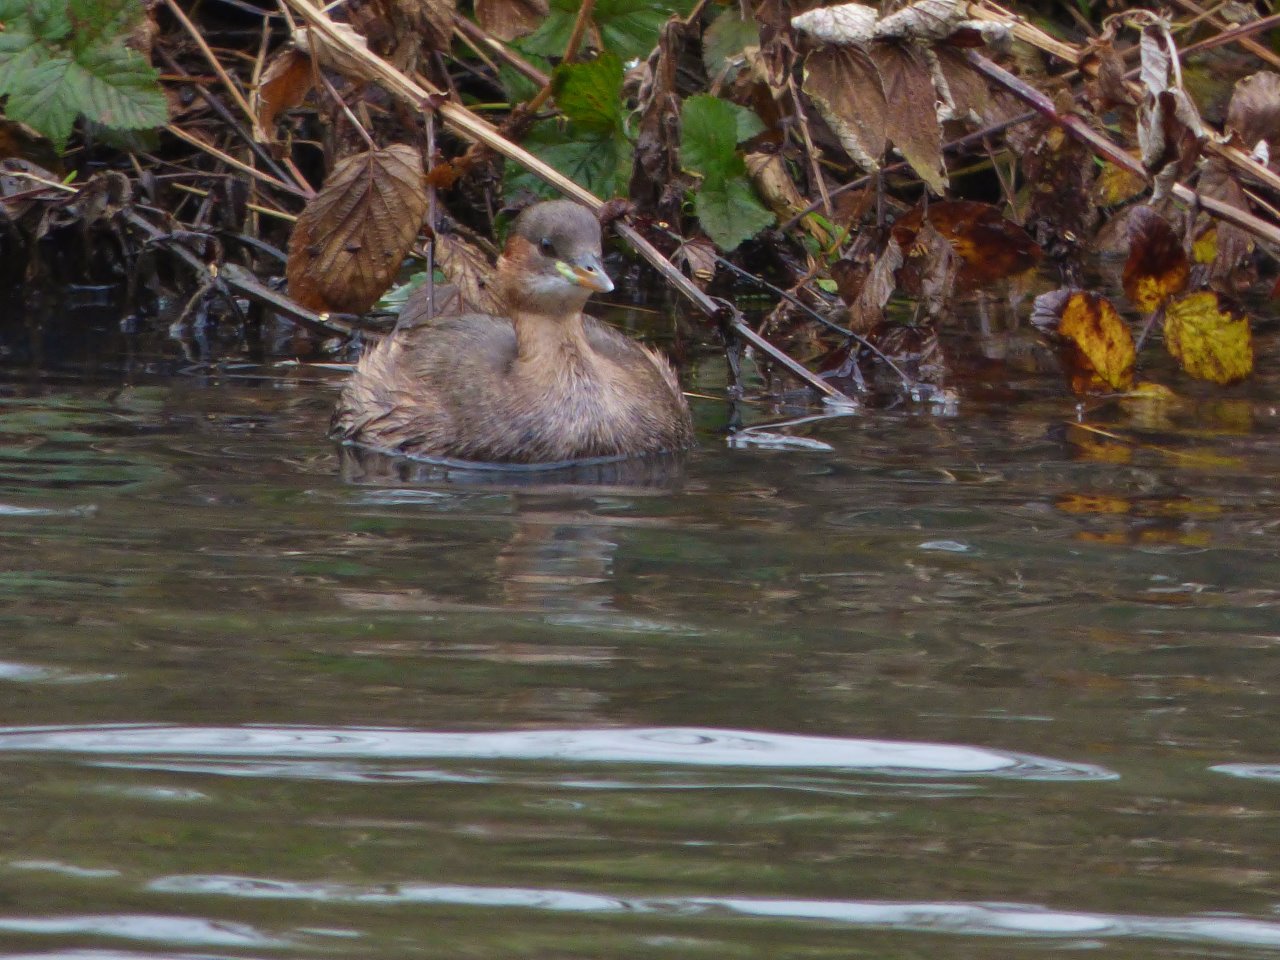 Dabchick (little grebe) on the River Wey.